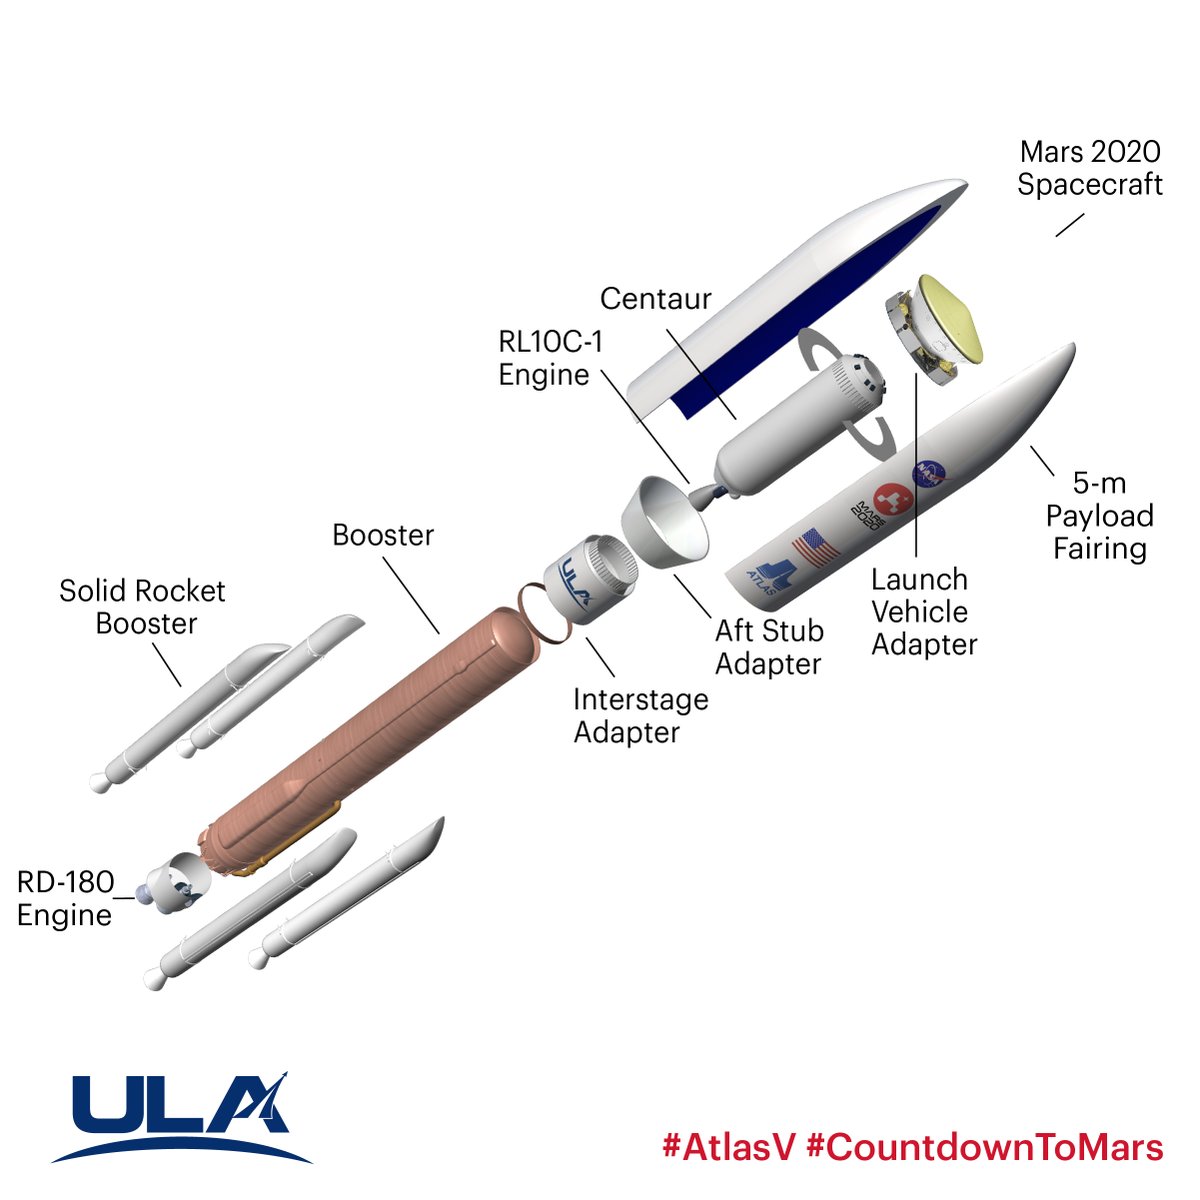 ULA is using the 541 version of the #AtlasV rocket that will generate the necessary power to put Perseverance on the flight path to Mars.